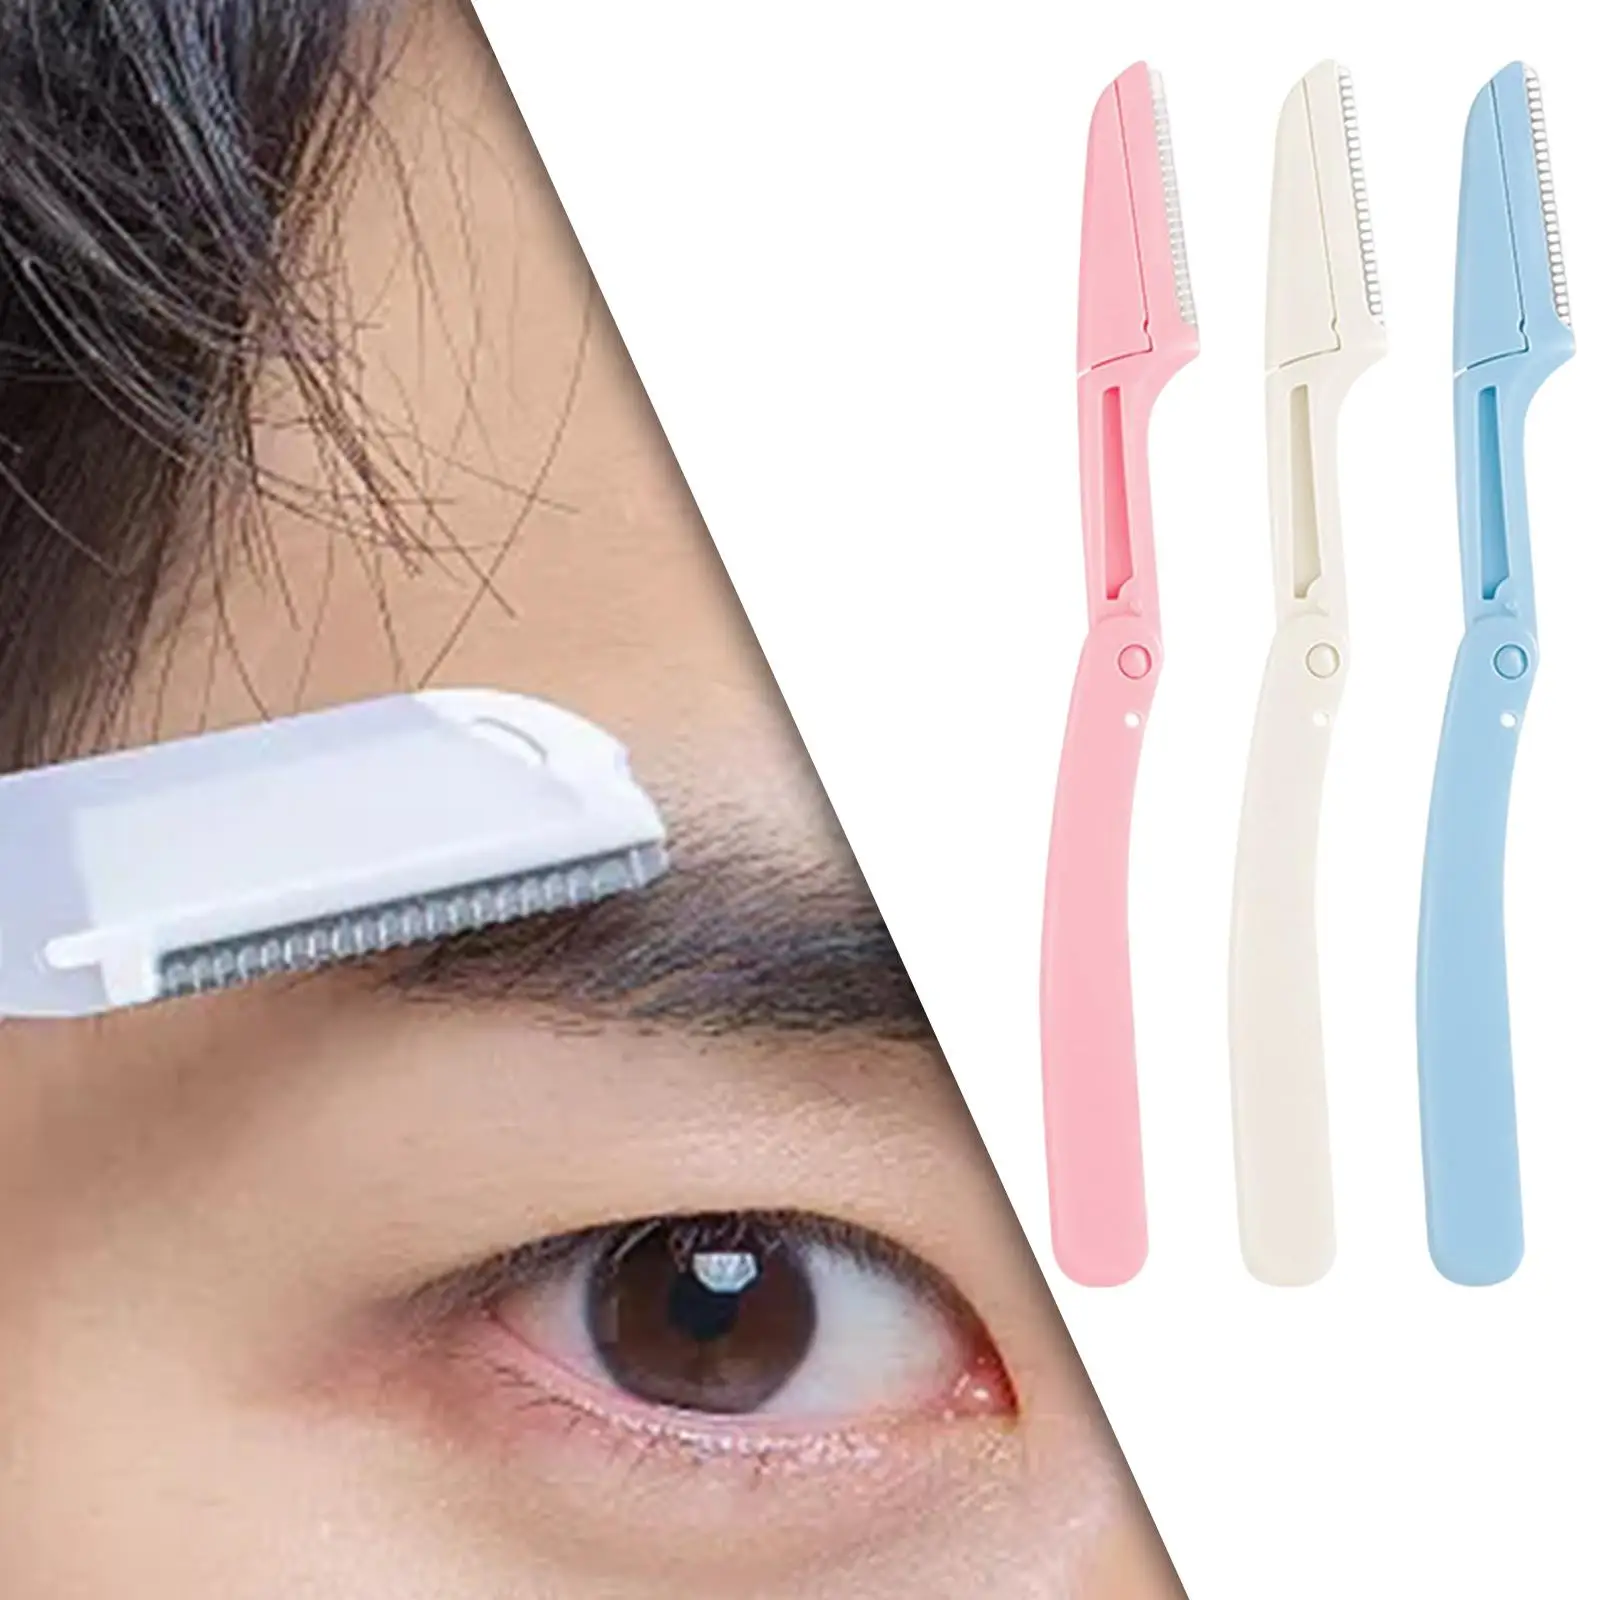 3x Foldable Eyebrow Shaper Shaping Handheld Reusable Groomer Smoothing Trimming Facial Hair Remover for Chin Legs Home Salon